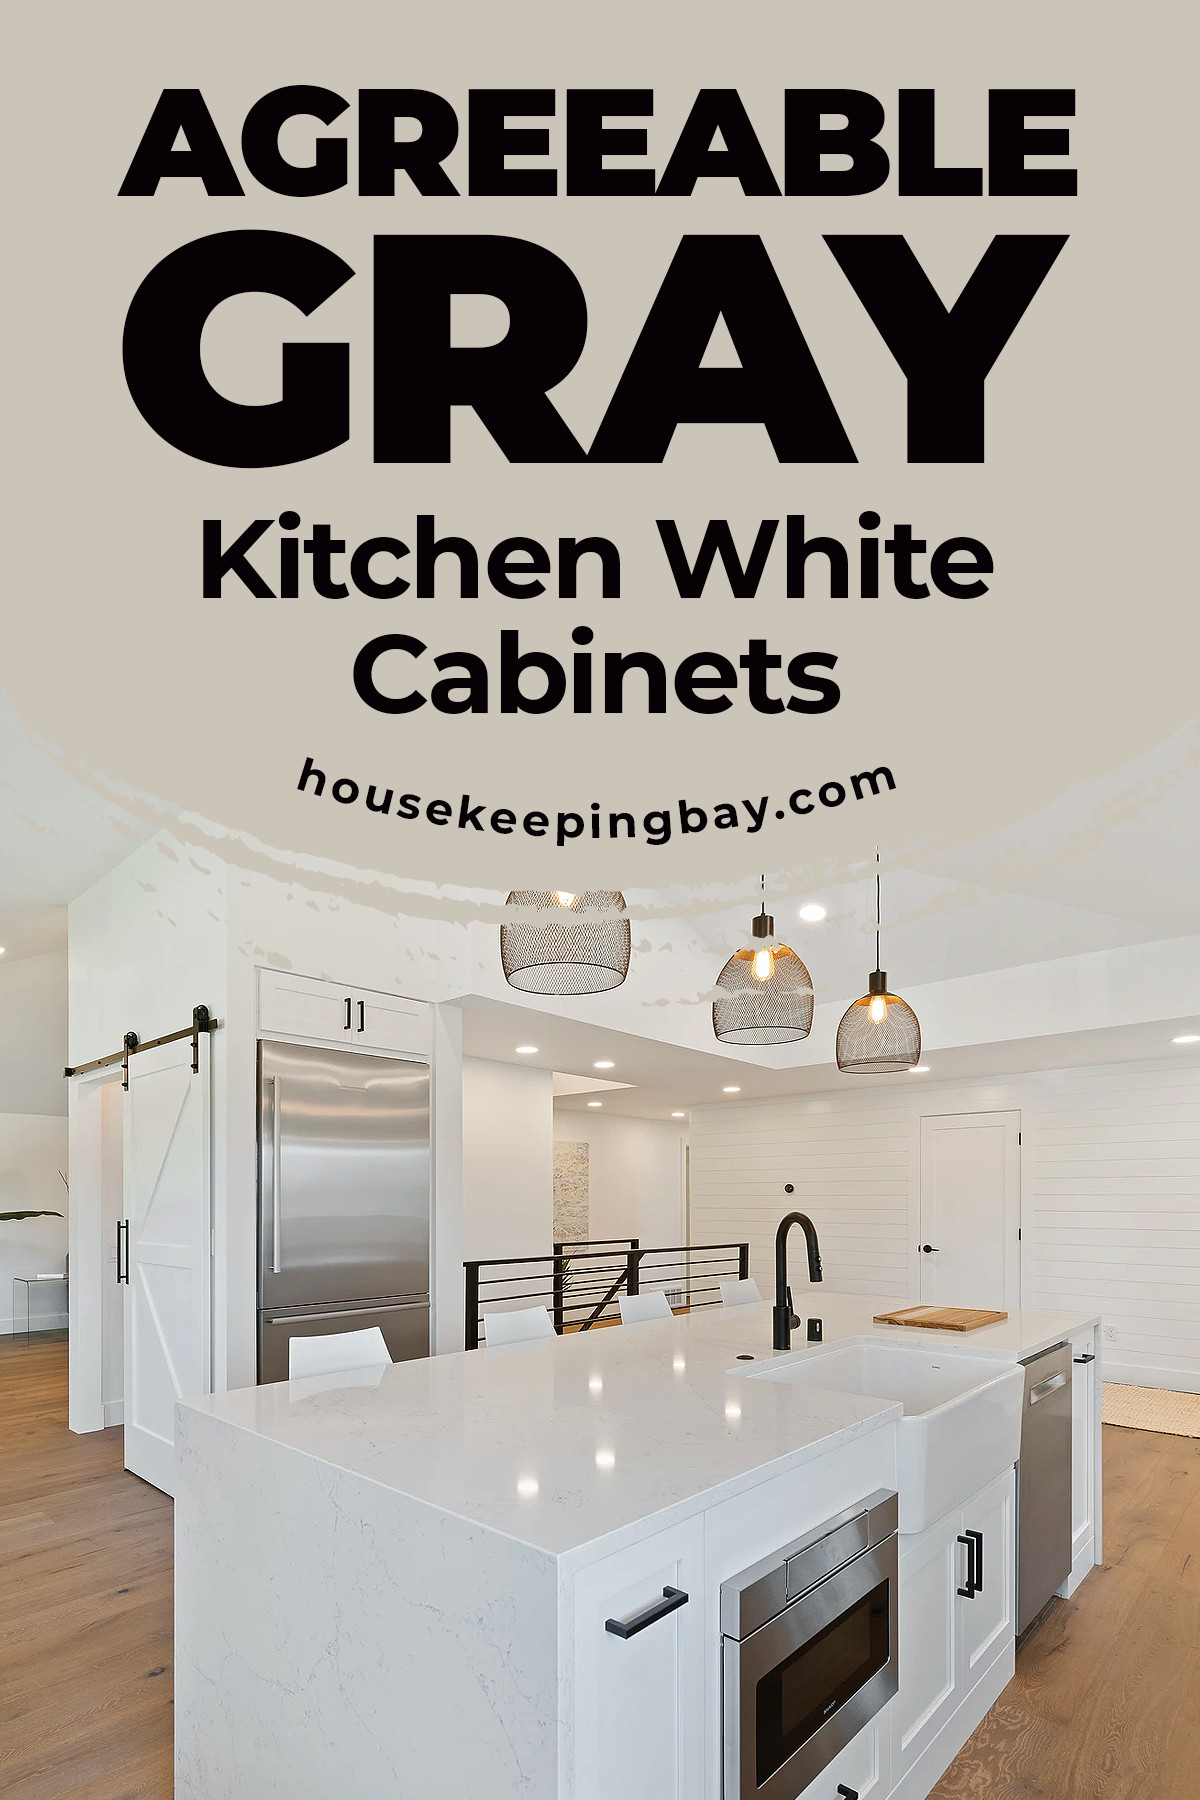 Agreeable gray kitchen white cabinets